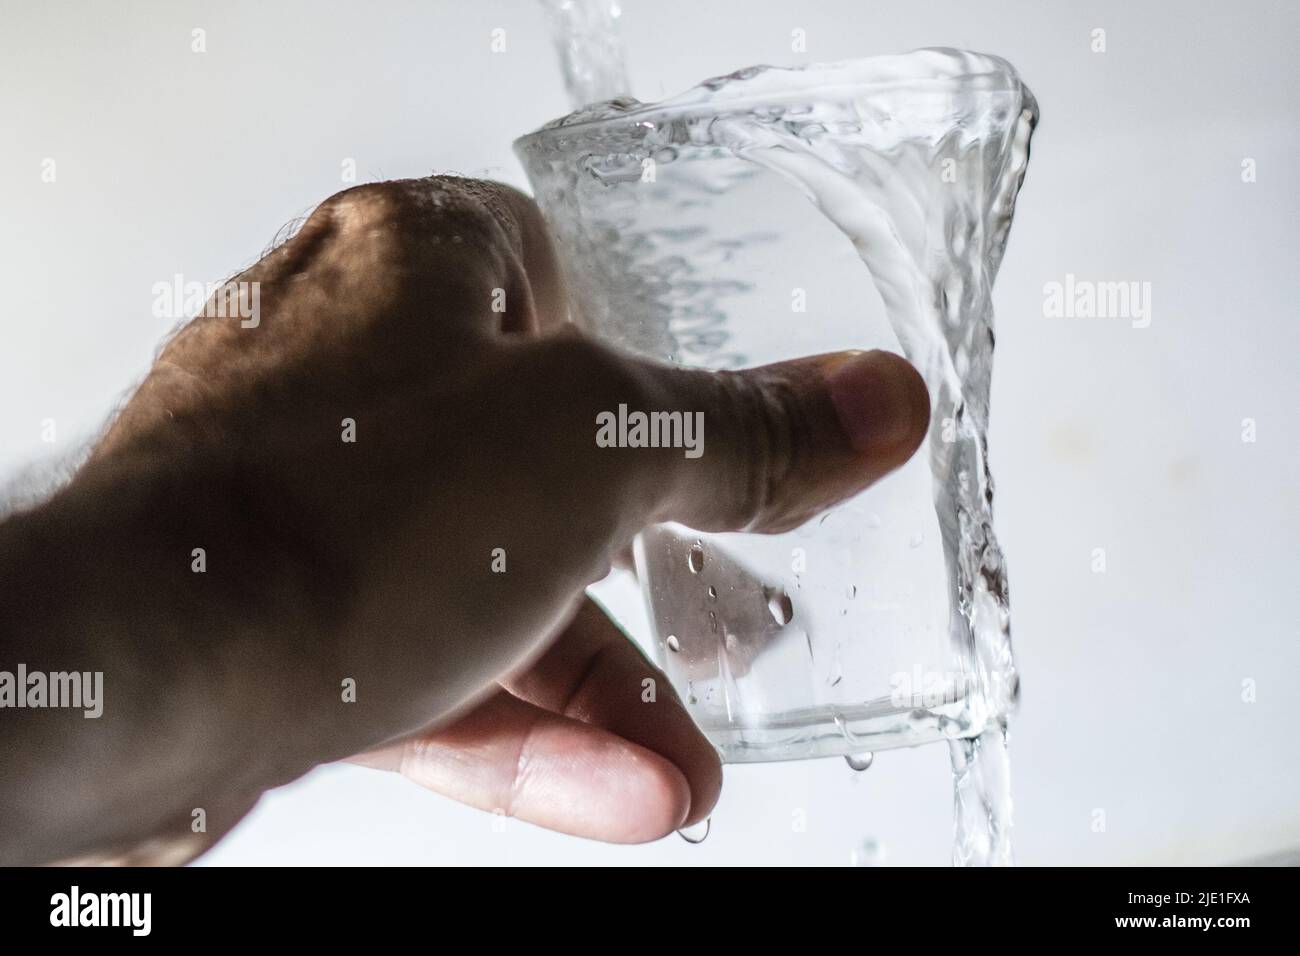 June 24, 2022, Rome, Italy: A man fills a glass with tap water. Lazio on 20 June declared a state of calamity for drought that has hit the central Italian region and many others, especially in the north. Lazio Governor Nicola Zingaretti said the move was aimed at taking measures such as saving water in all activities starting with household consumption. A drought alert has spread from the Po valley, where waters are three quarters down amid the worst drought in 70 years, to central rivers like the Arno, the Aniene and the Tiber, which have half the water they normally do at this time of the ye Stock Photo